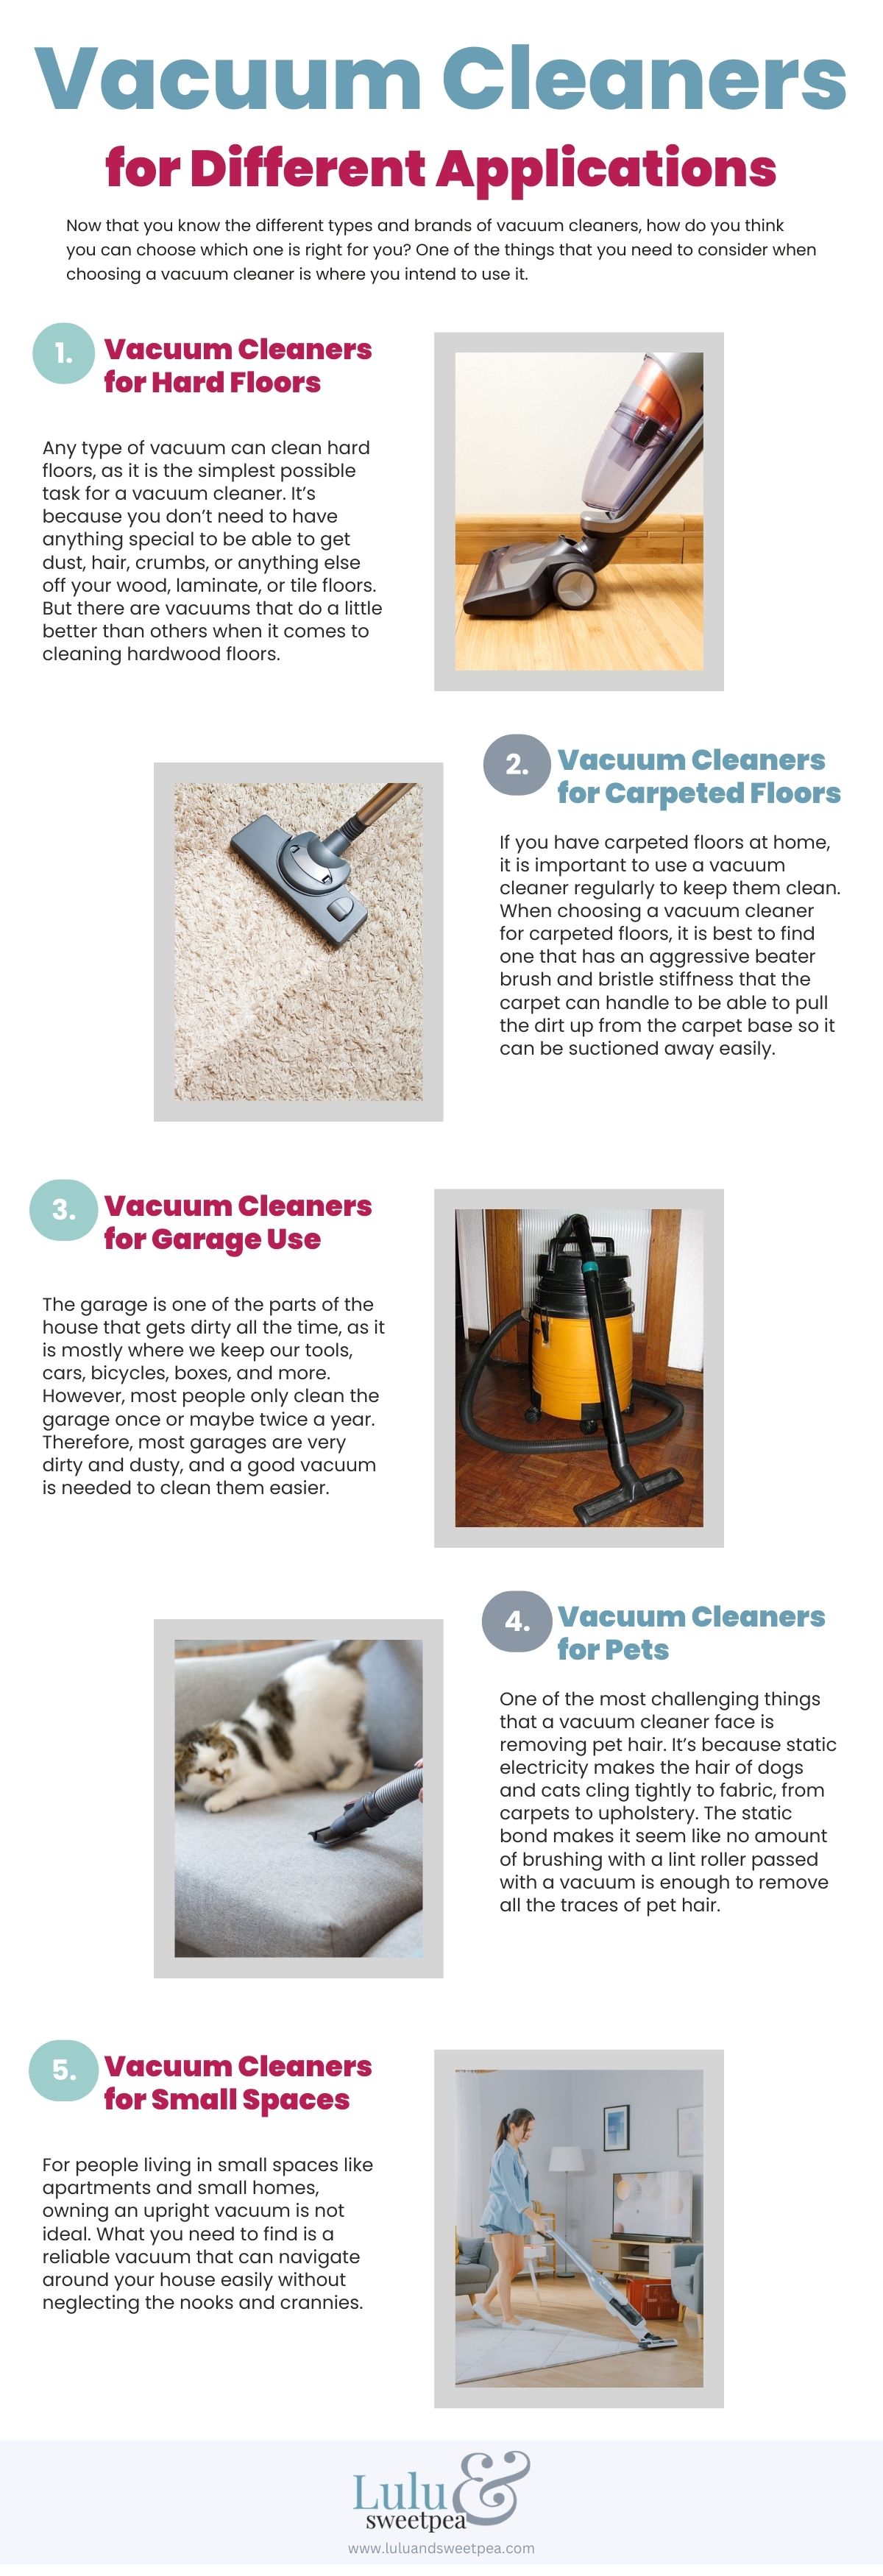 Vacuum Cleaners for Different Applications